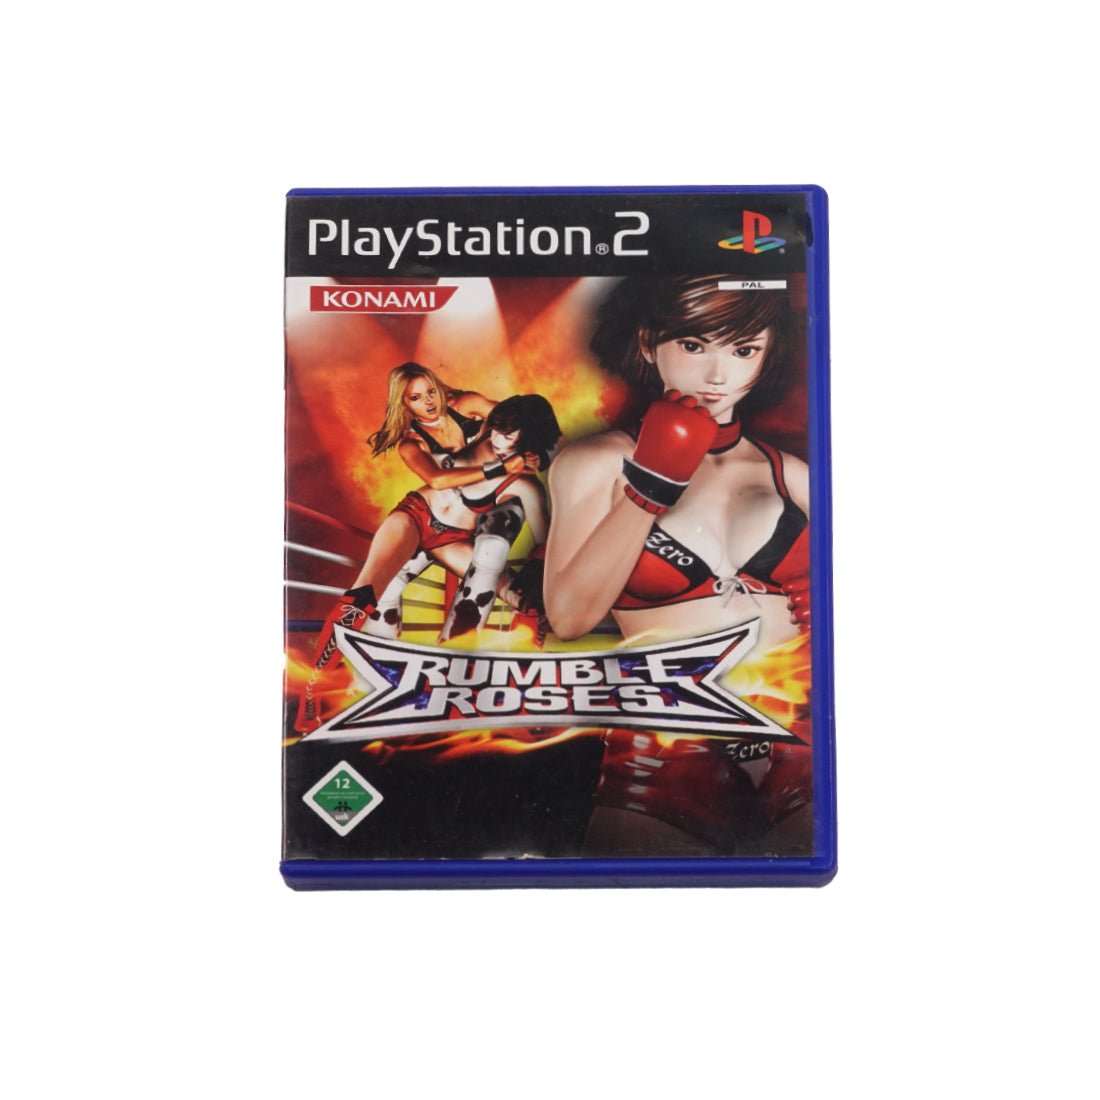 (Pre-Owned) Rumble Roses - PlayStation 2 - Store 974 | ستور ٩٧٤